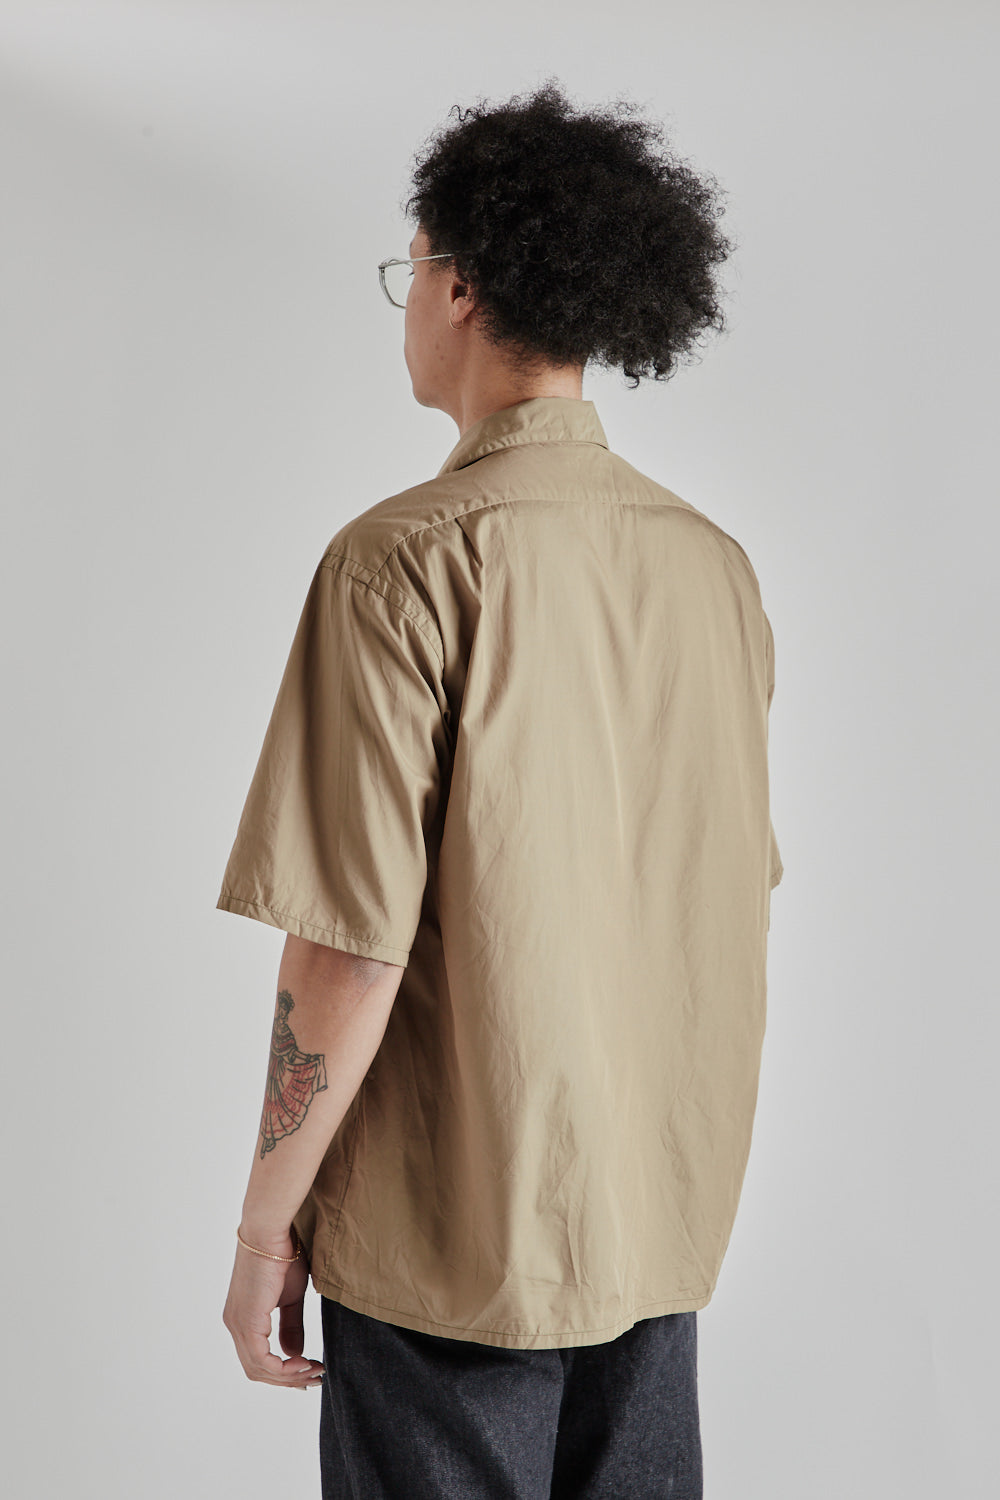 Blurhms Chambray Open Collar Shirt in Olive Beige